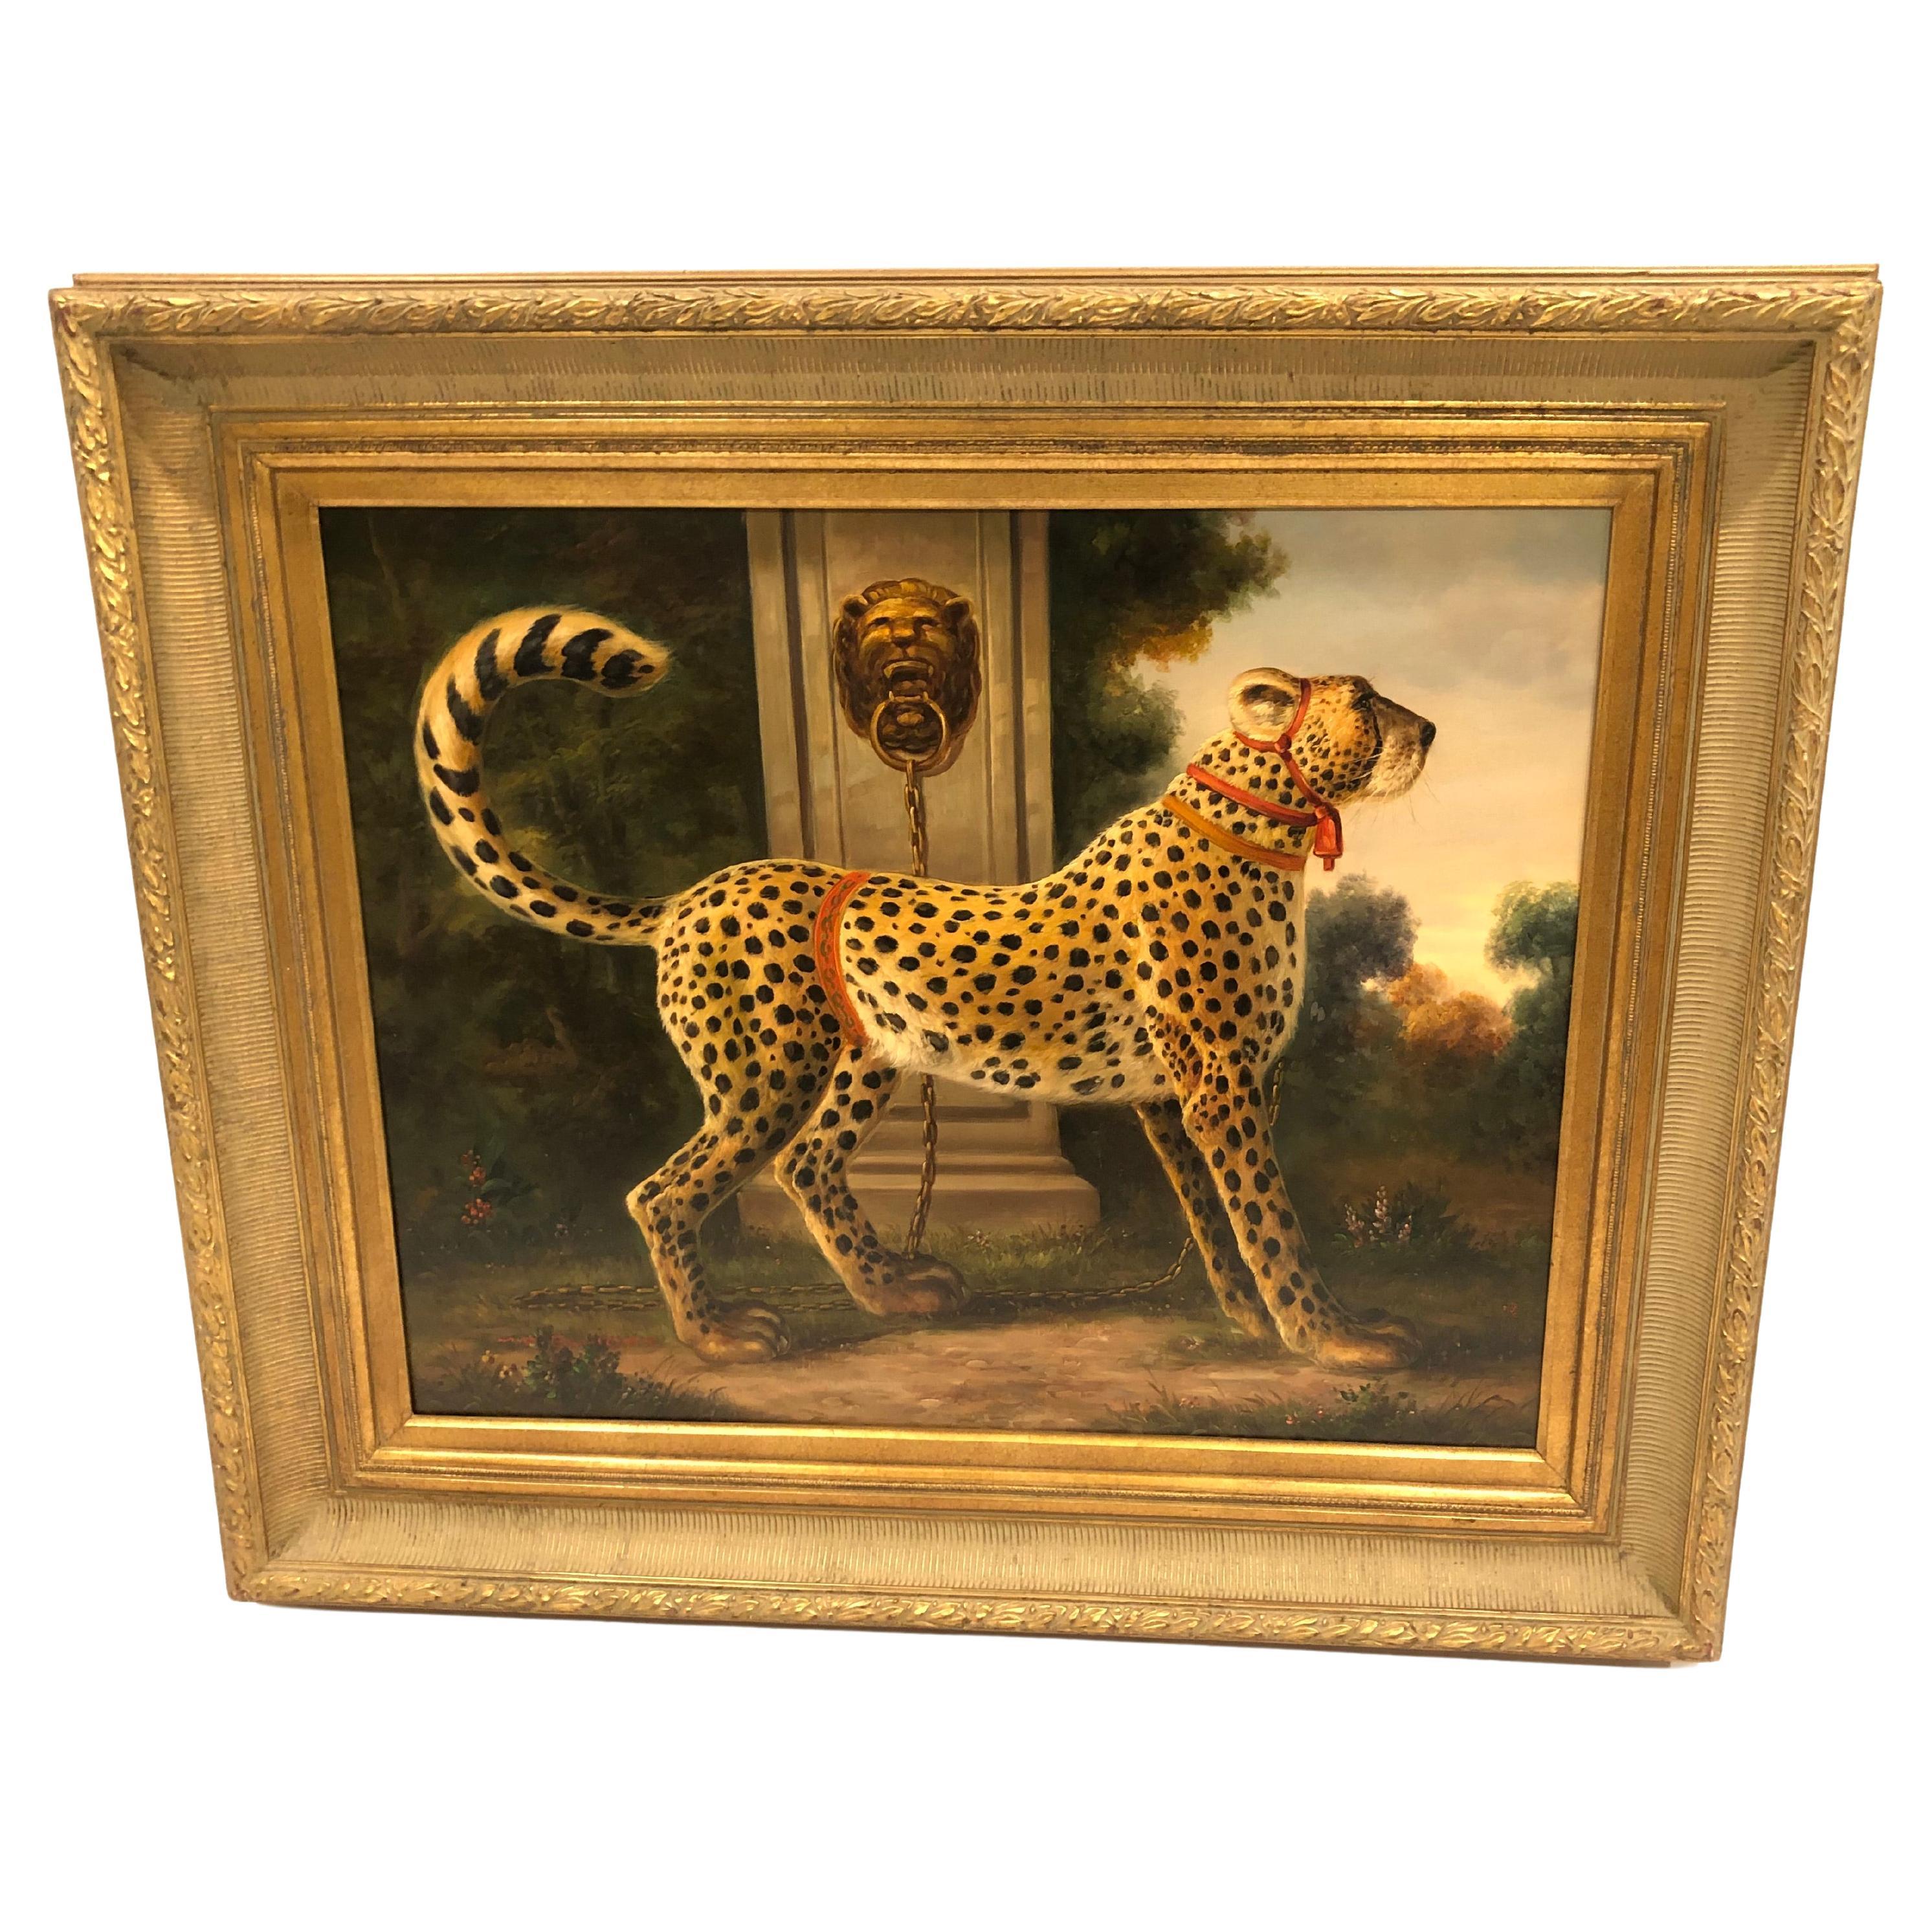 Gorgeous Cheetah in Landscape Painting in the Manner of William Skilling